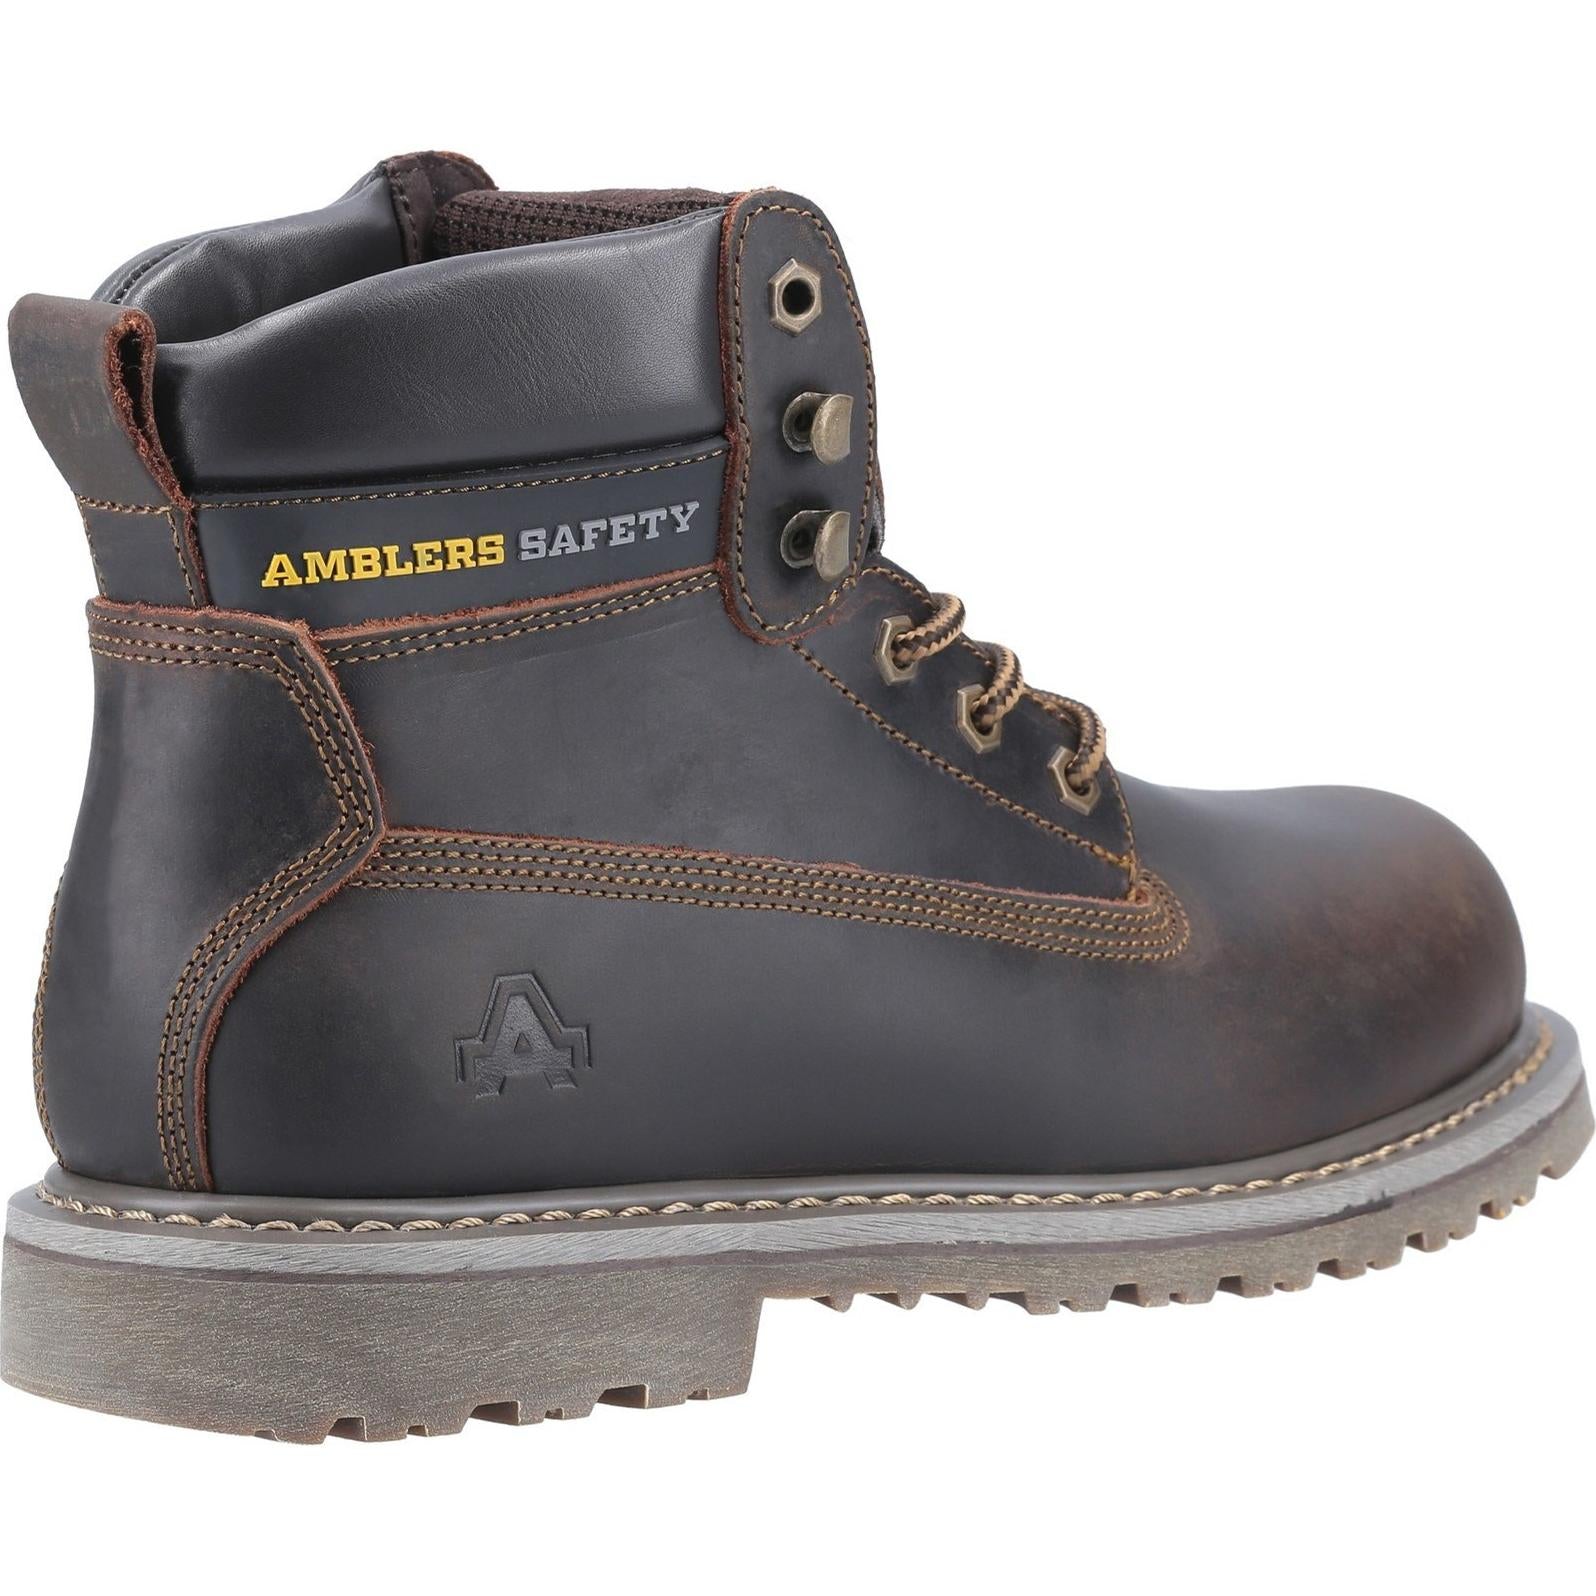 Amblers Safety FS164 Industrial Safety Boot